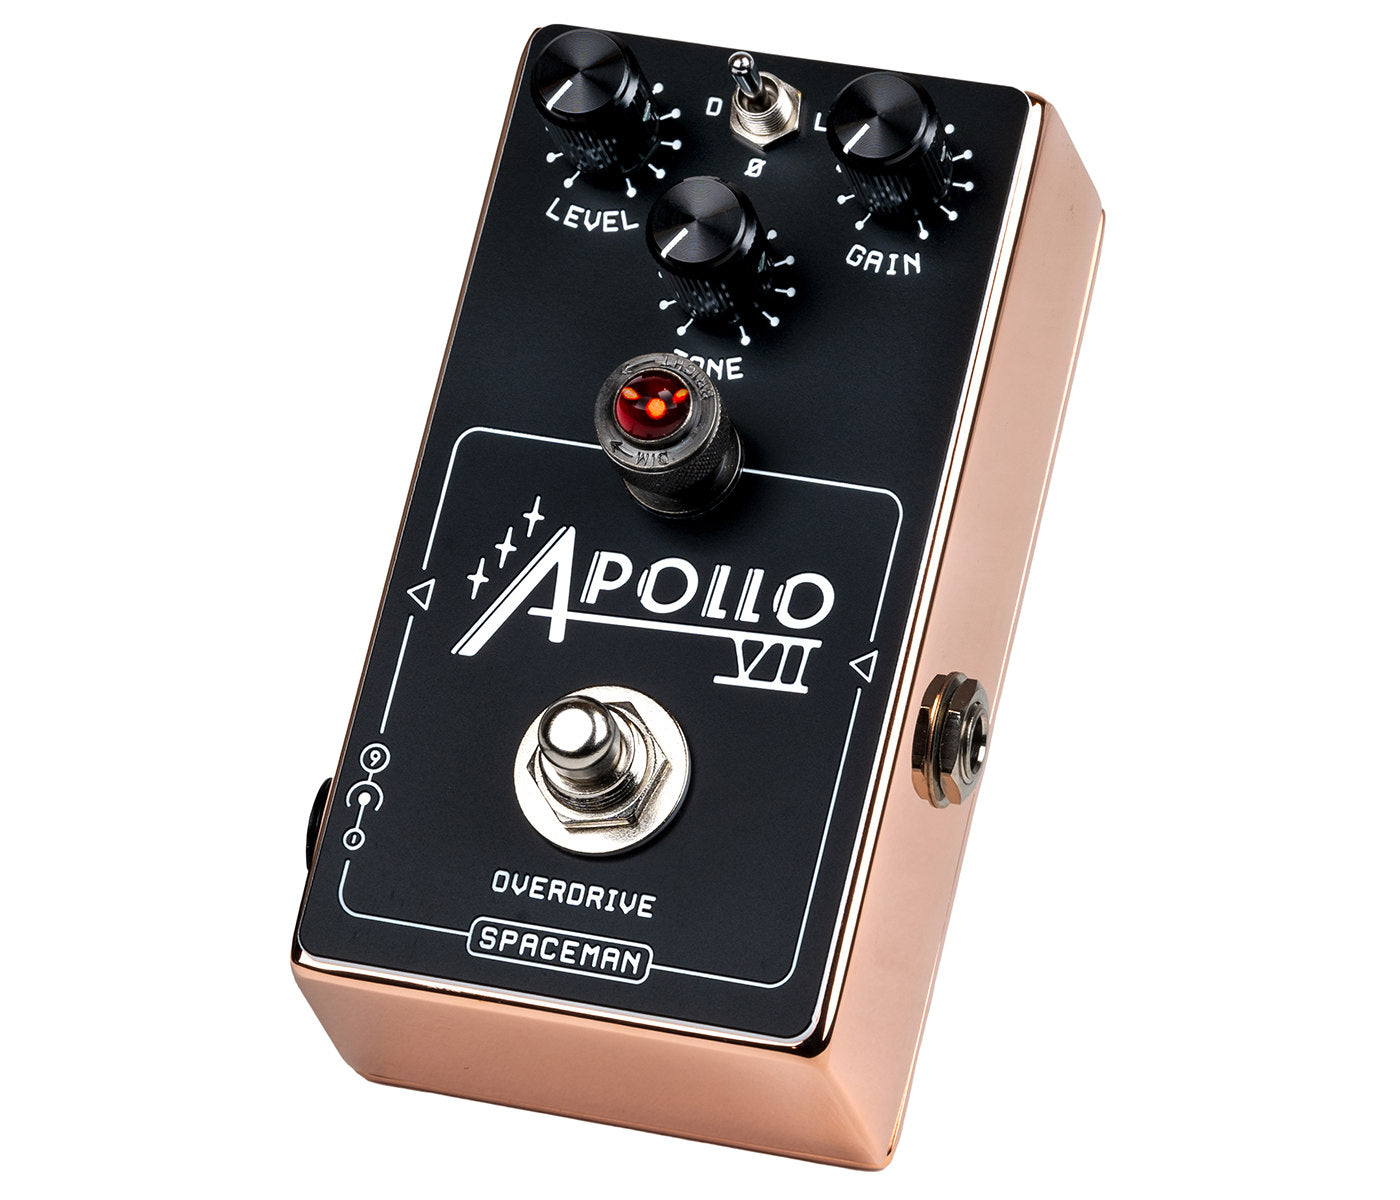 Apollo VII - Overdrive - Spaceman Effects